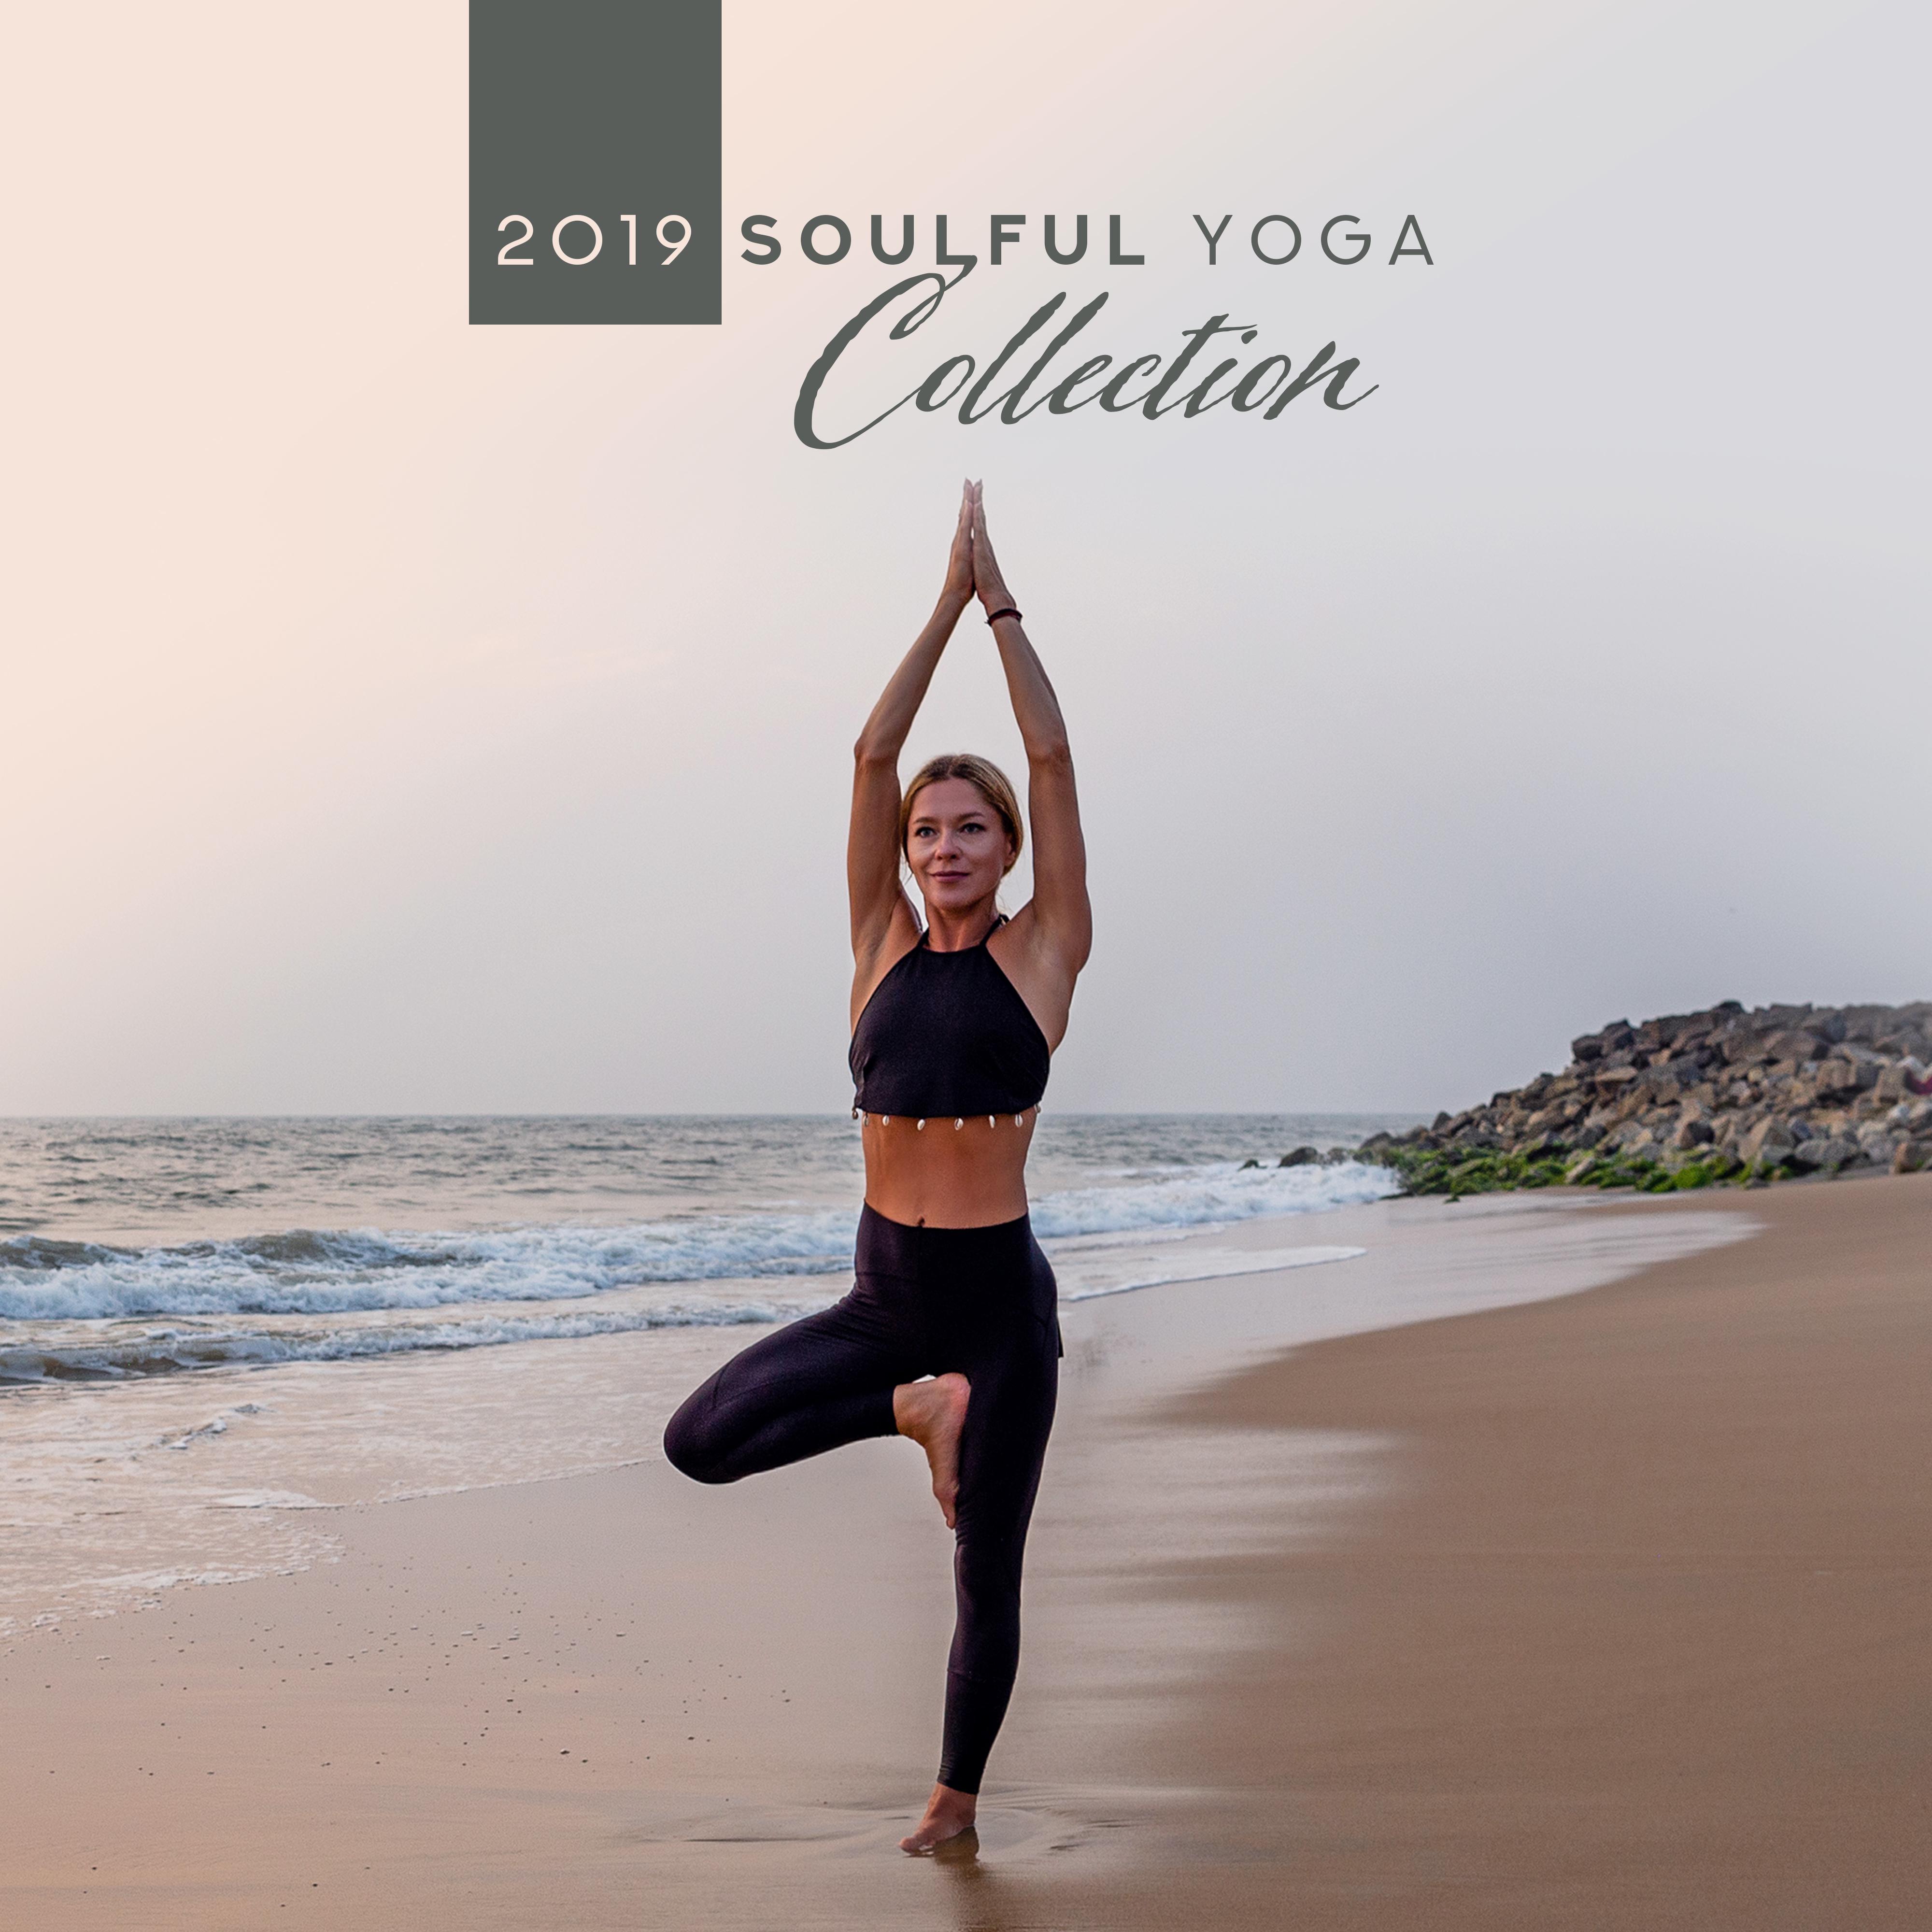 2019 Soulful Yoga Collection